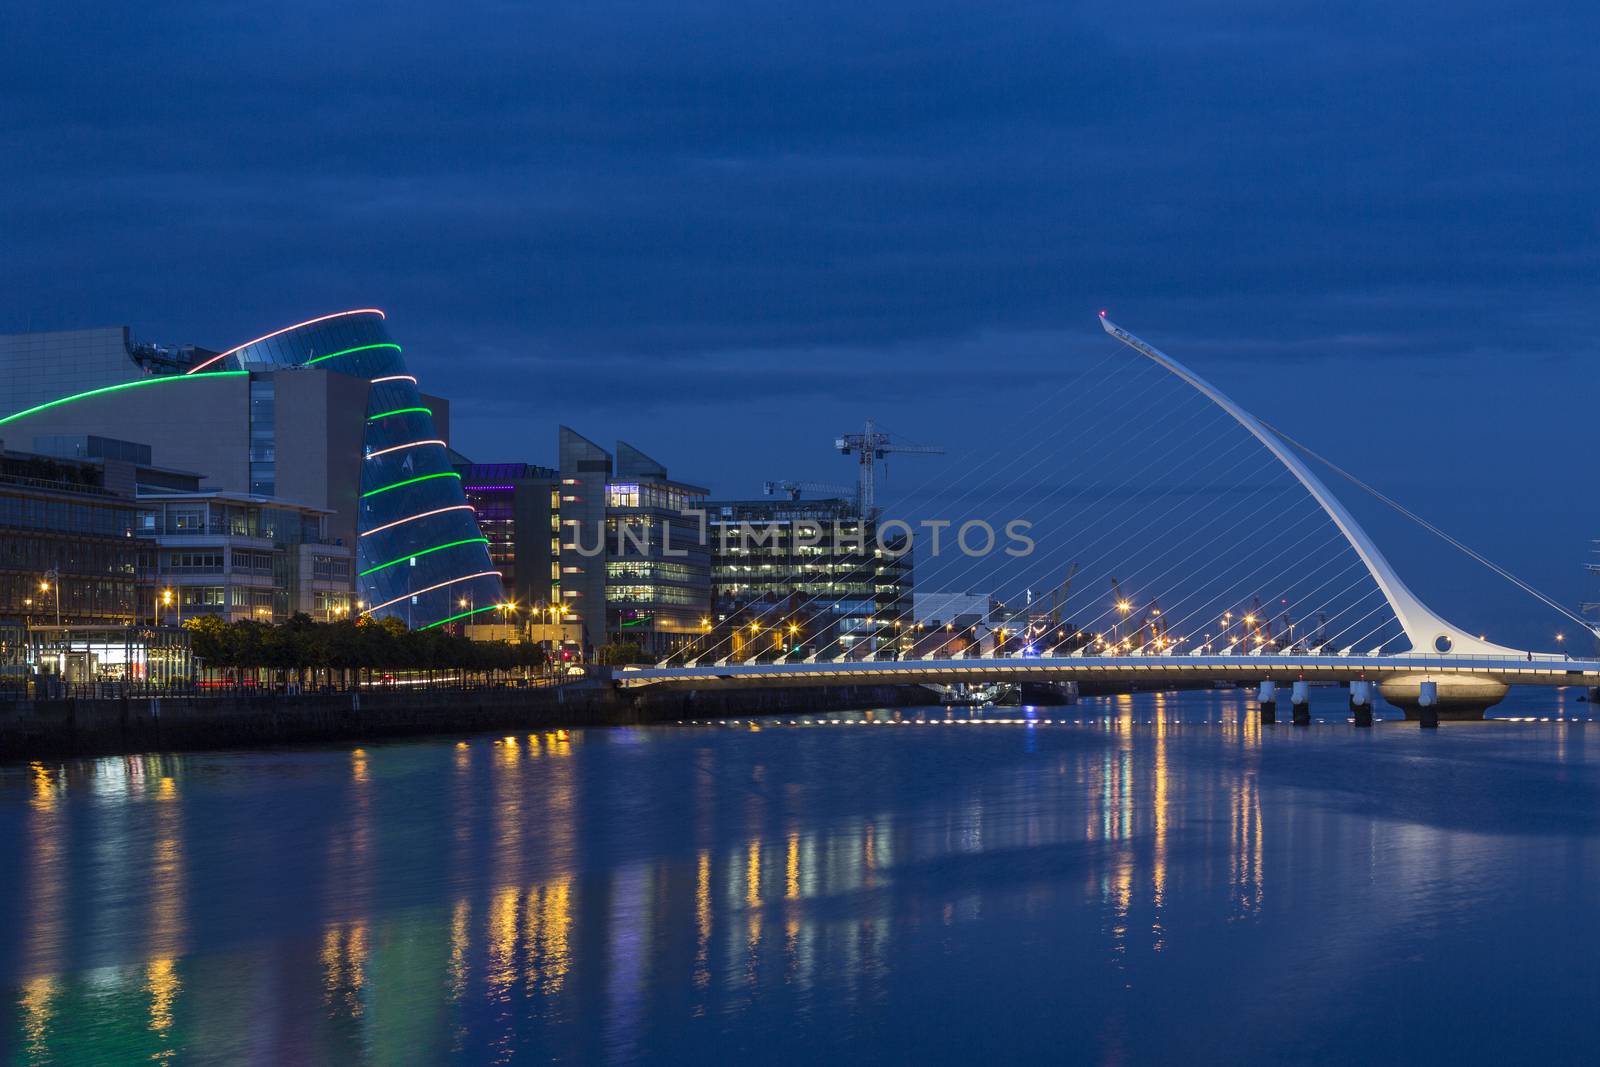 The River Liffey, the Samuel Beckett Bridge and the building on the waterfront near the Convention Center - Dublin city center in the republic of Ireland.